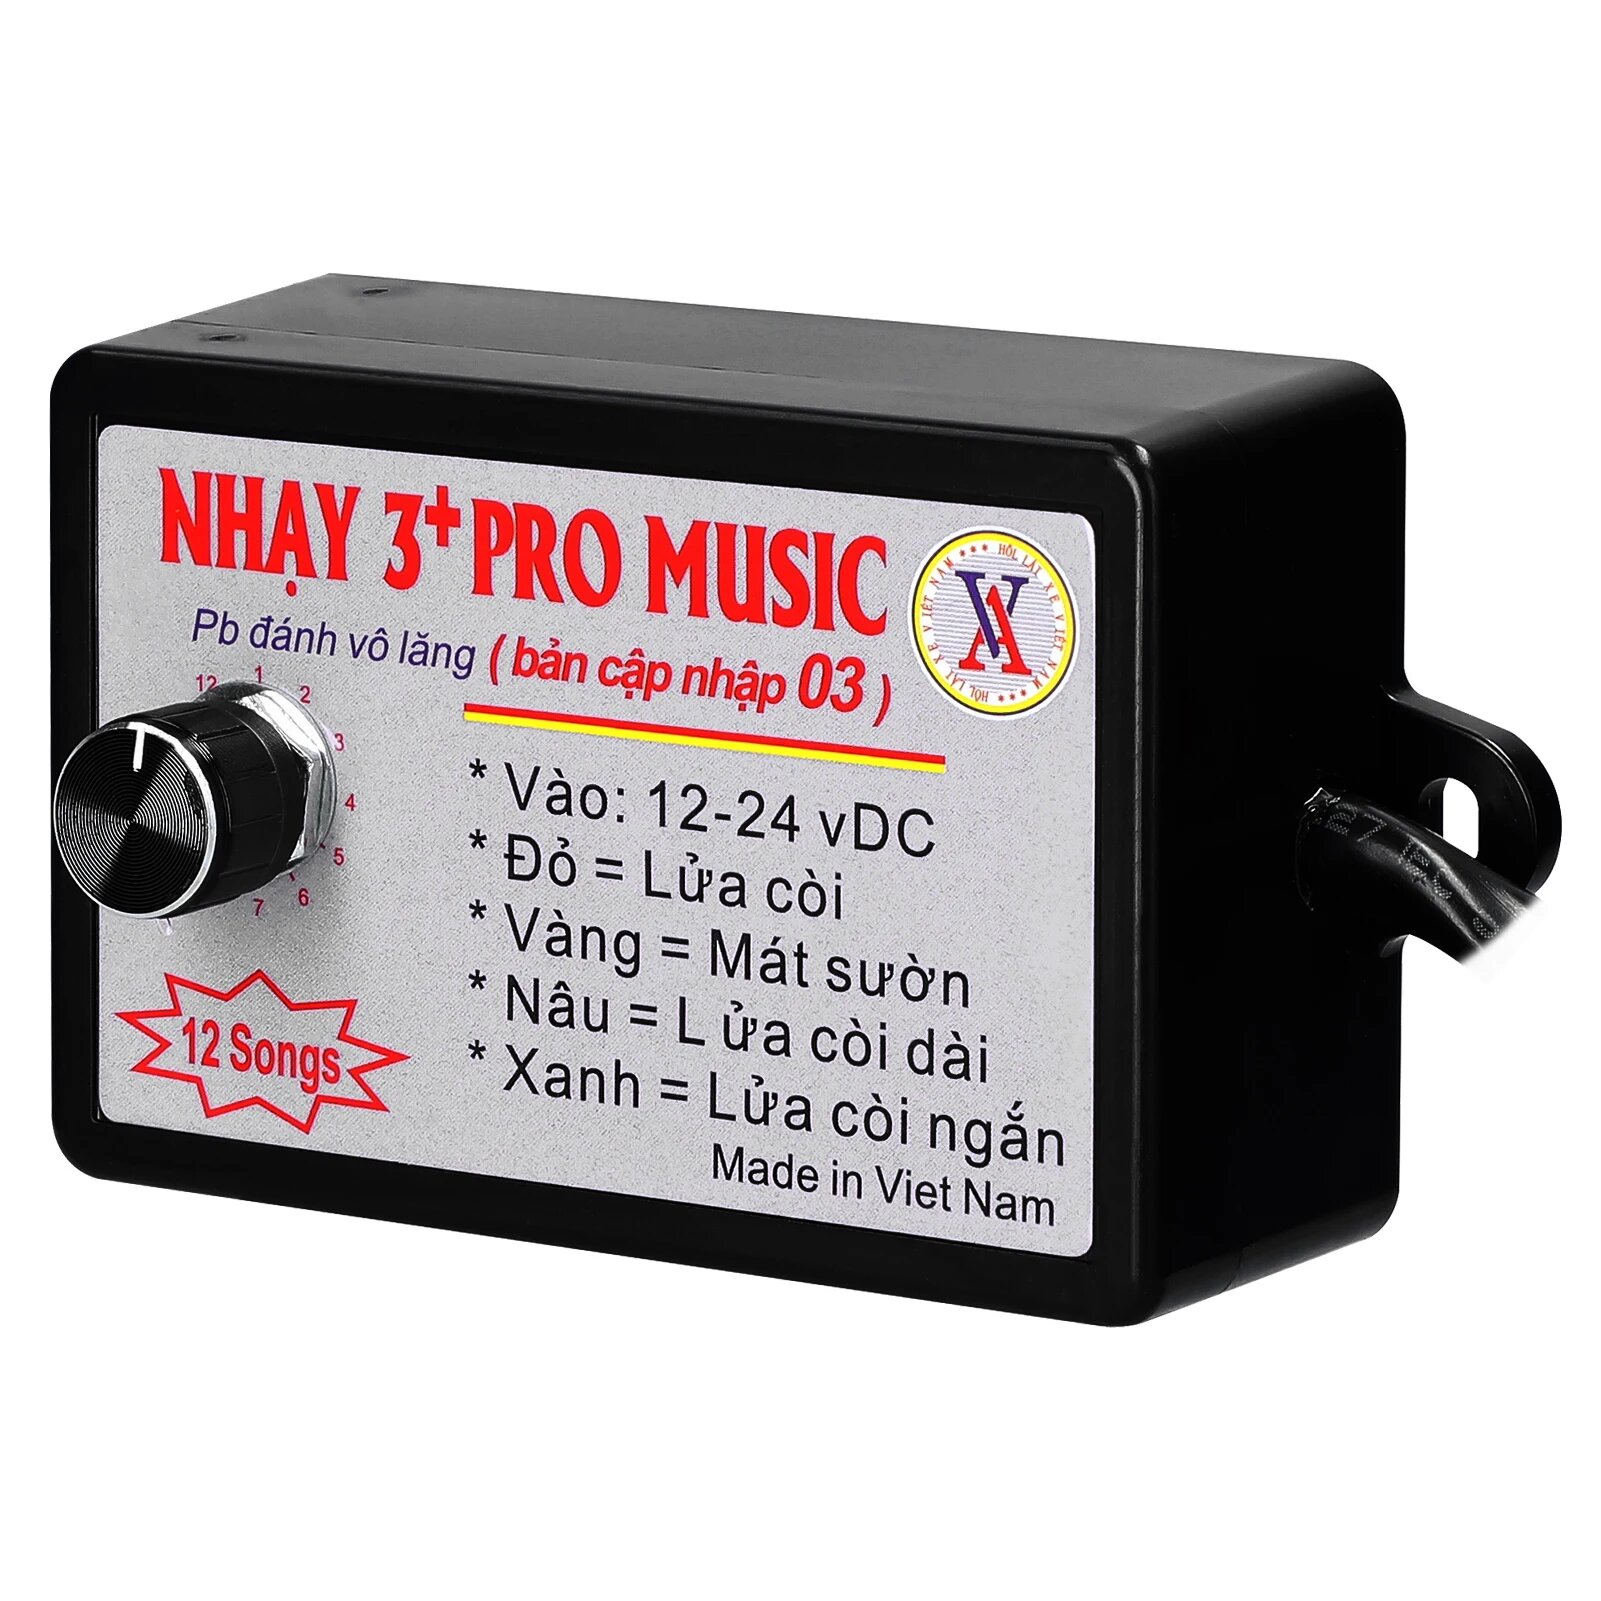 Car Horn Controller Nhay 3+ Pro Music Rapid Horn Relay 12-24V music relay tunebox music box Speaker Control